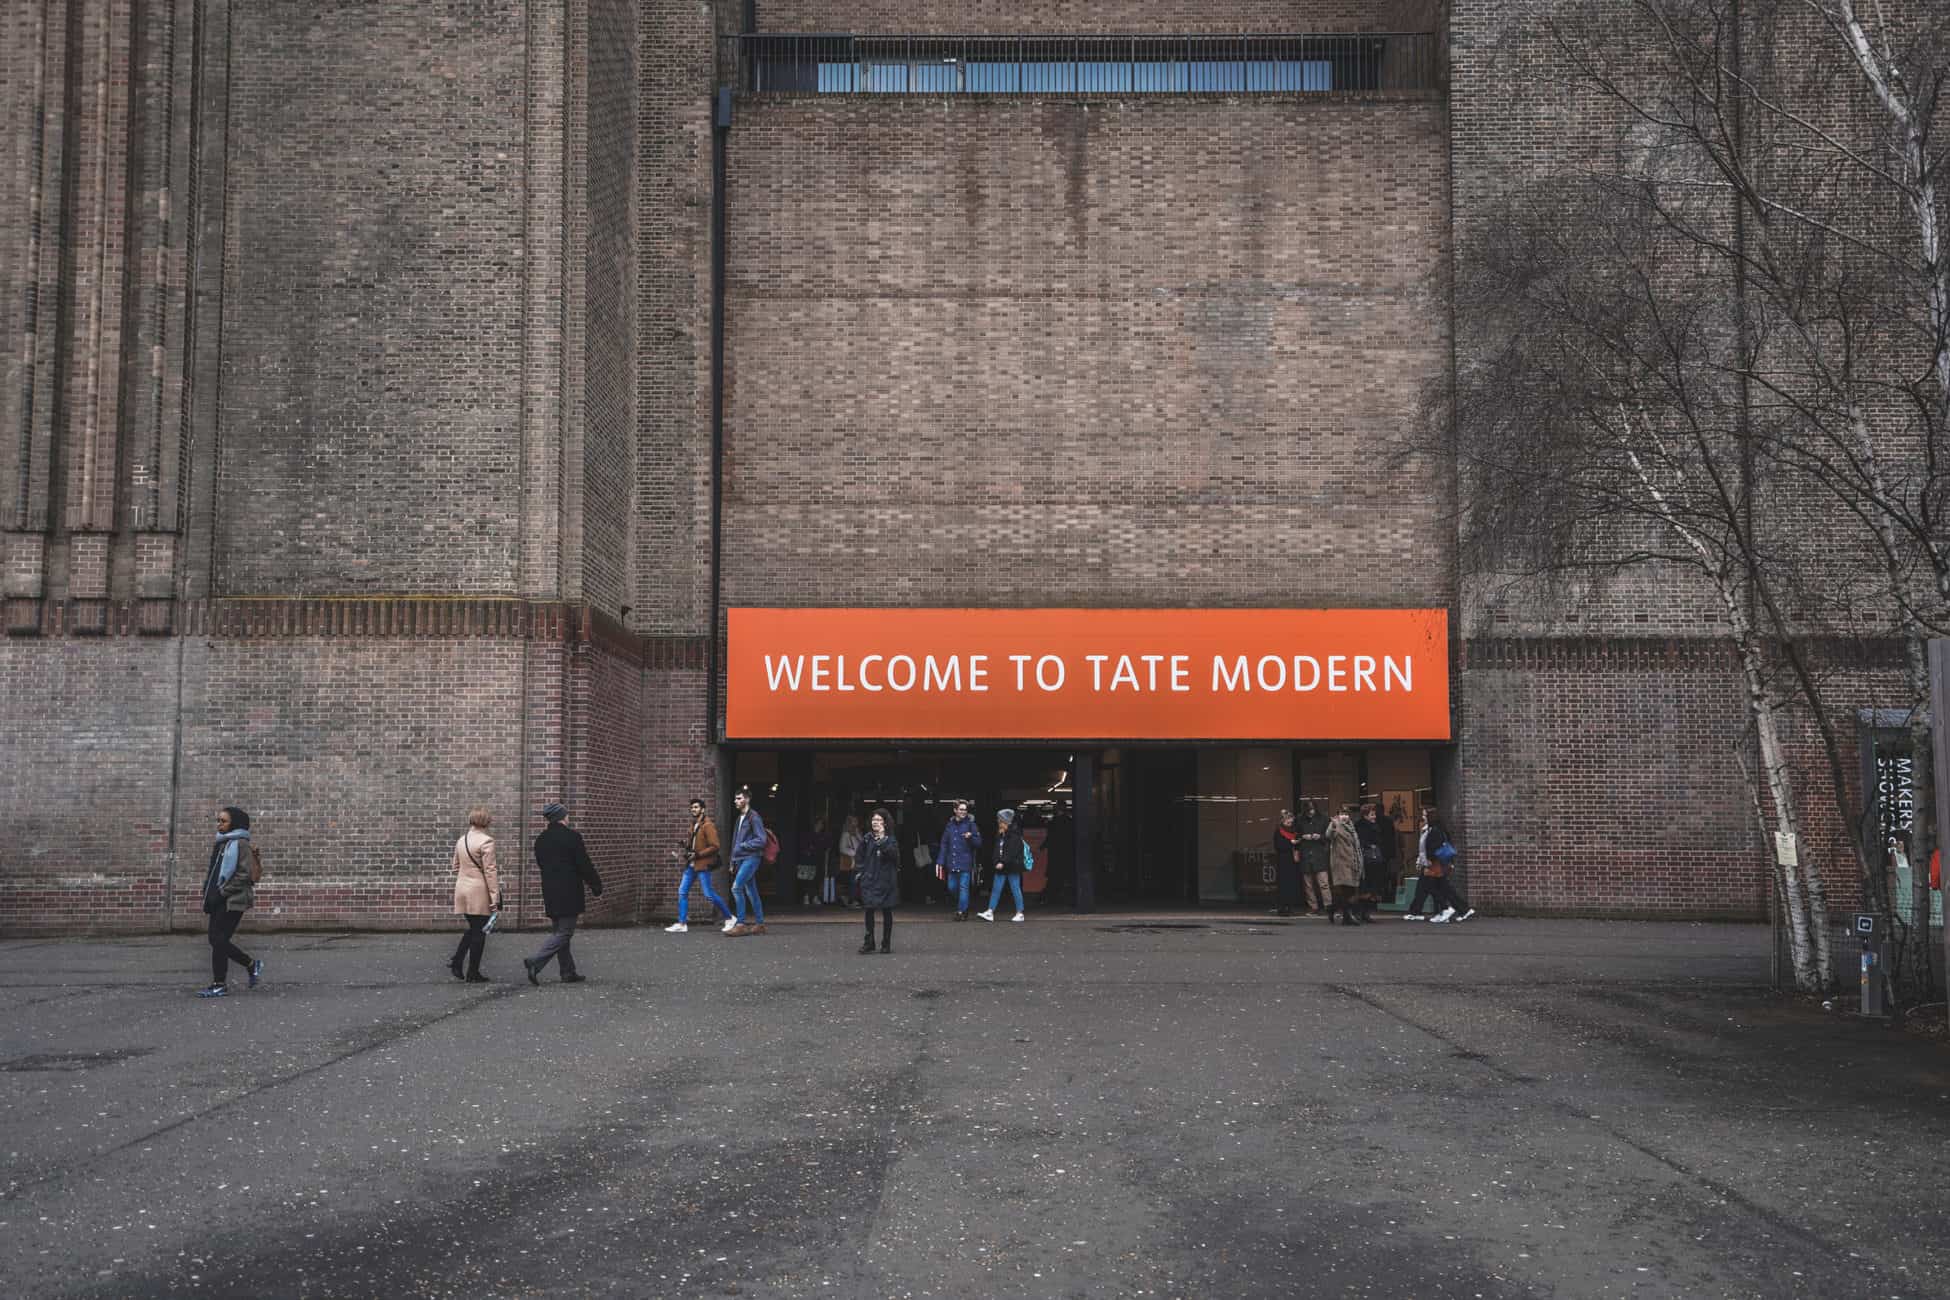 Amazing & fun things to do in South London | Attractions, cafes & more Tate Modern